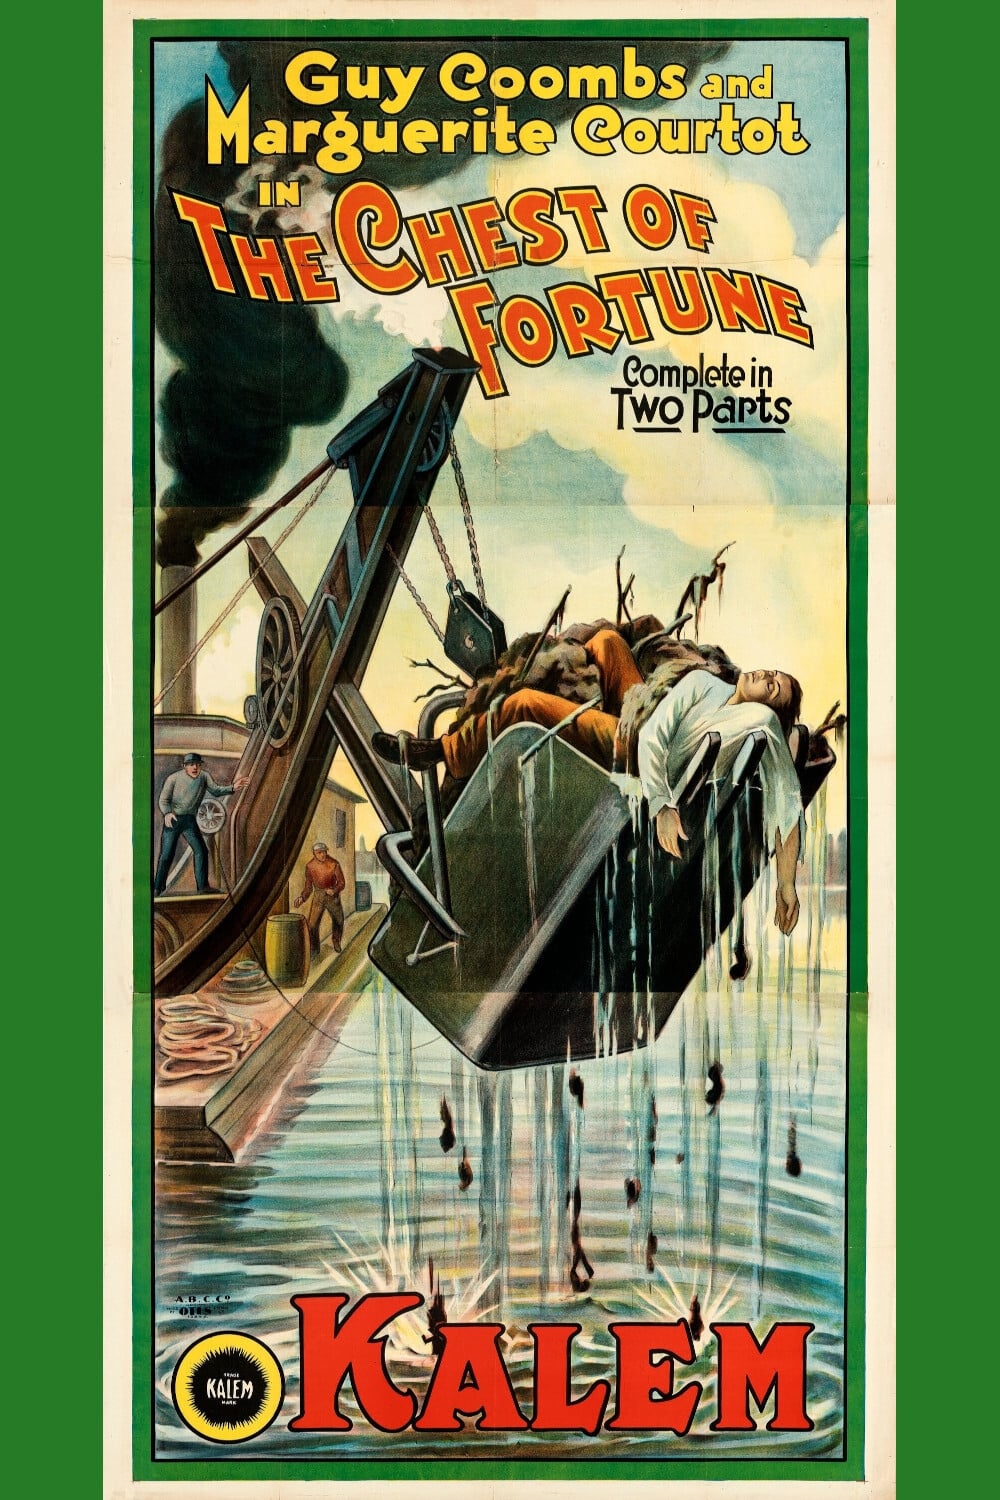 The Chest of Fortune (1914)